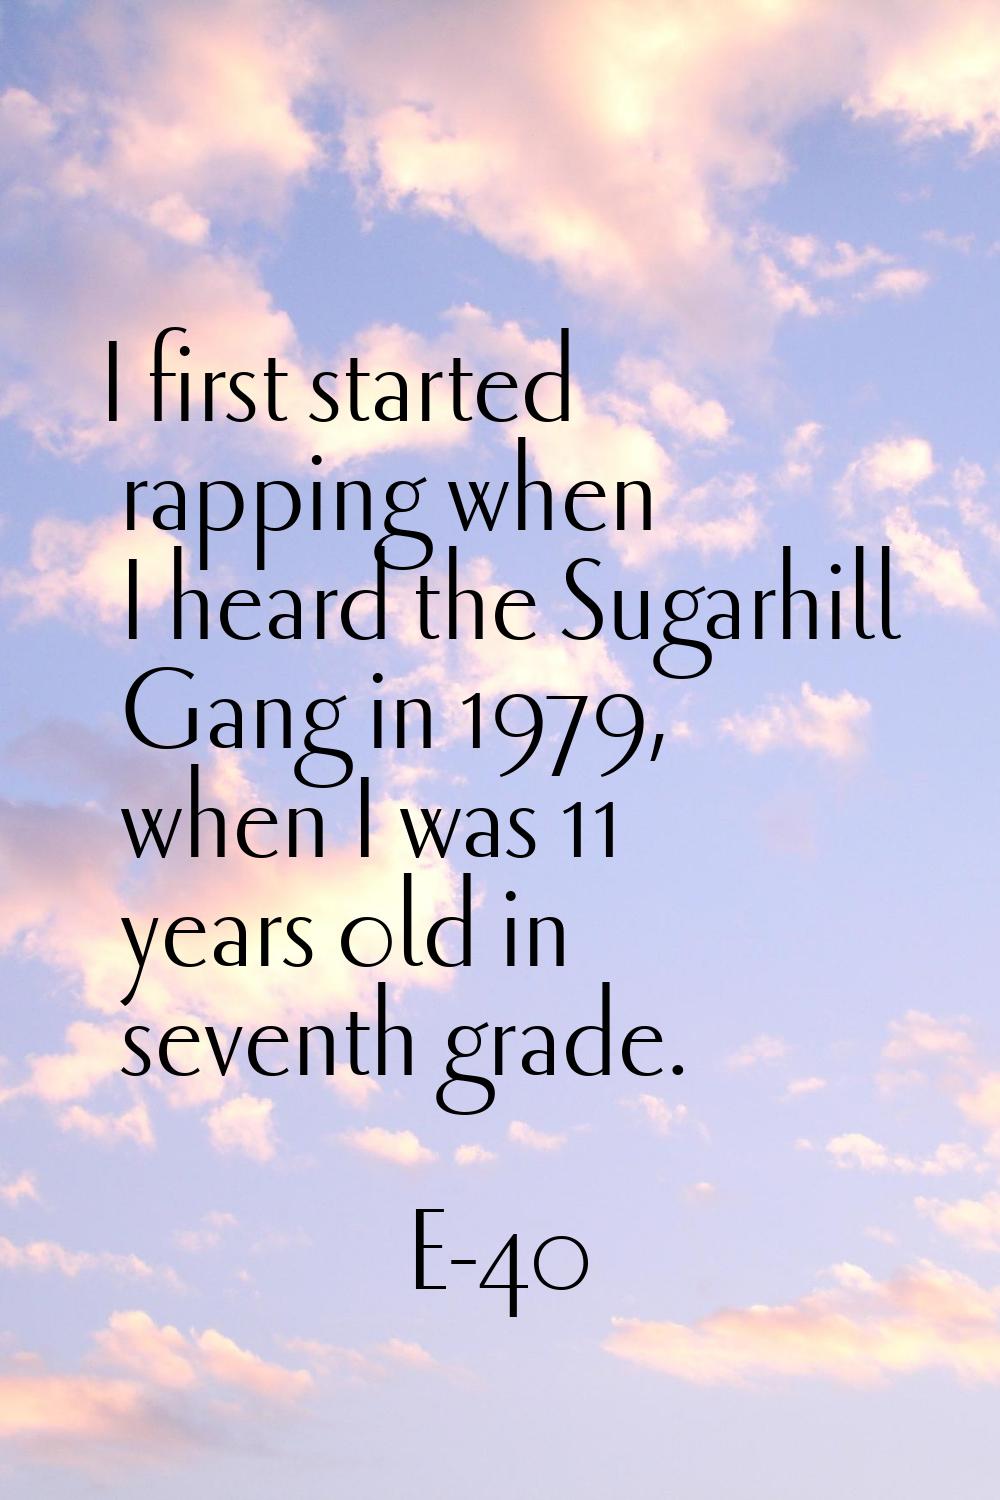 I first started rapping when I heard the Sugarhill Gang in 1979, when I was 11 years old in seventh